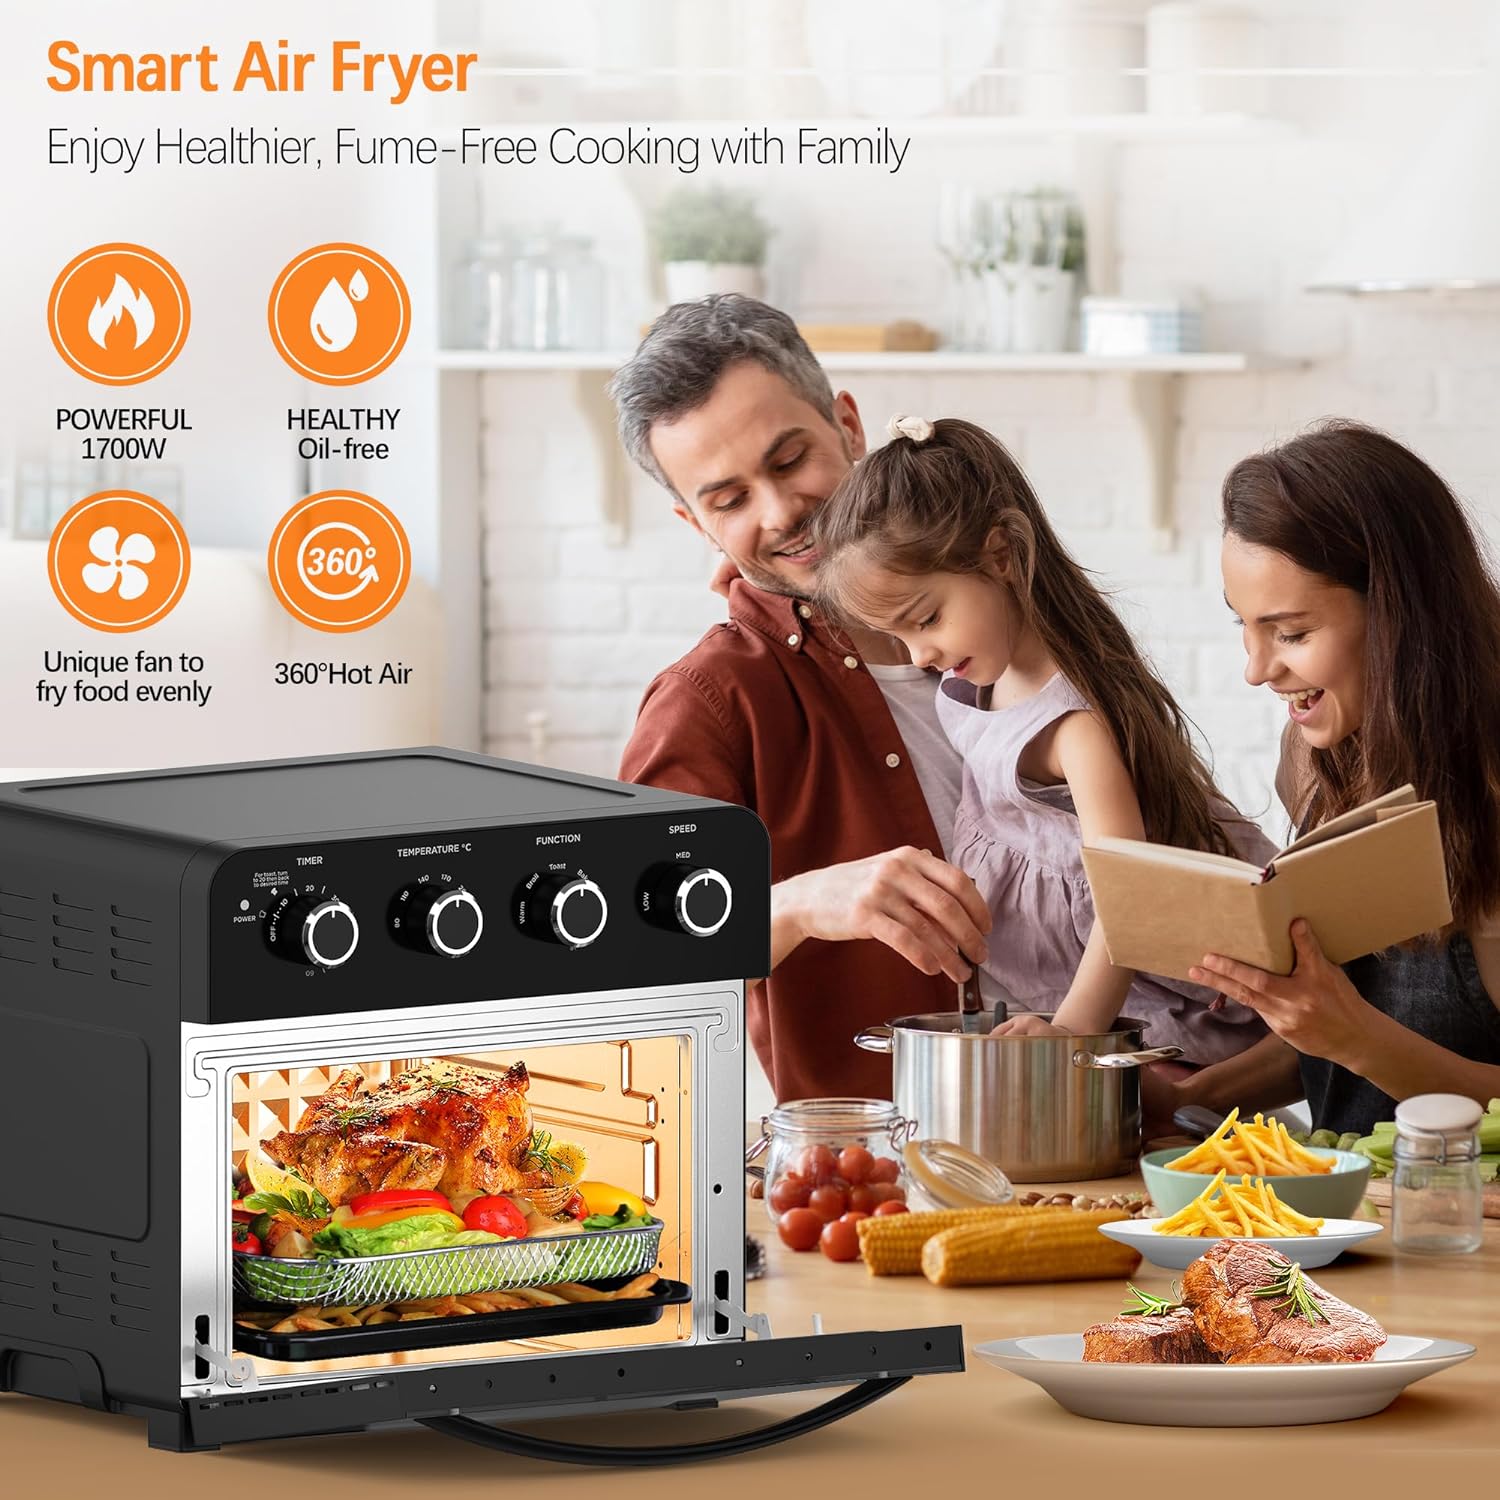 Large Air Fryer Oven 23L Multi-function Mini Oven, Countertop Convection Oven with Rotisserie, airfryer with 4 Knobs Easy to Operation, Oil-Less Cooking, 6 Accessories with 100 Recipess, 1700W